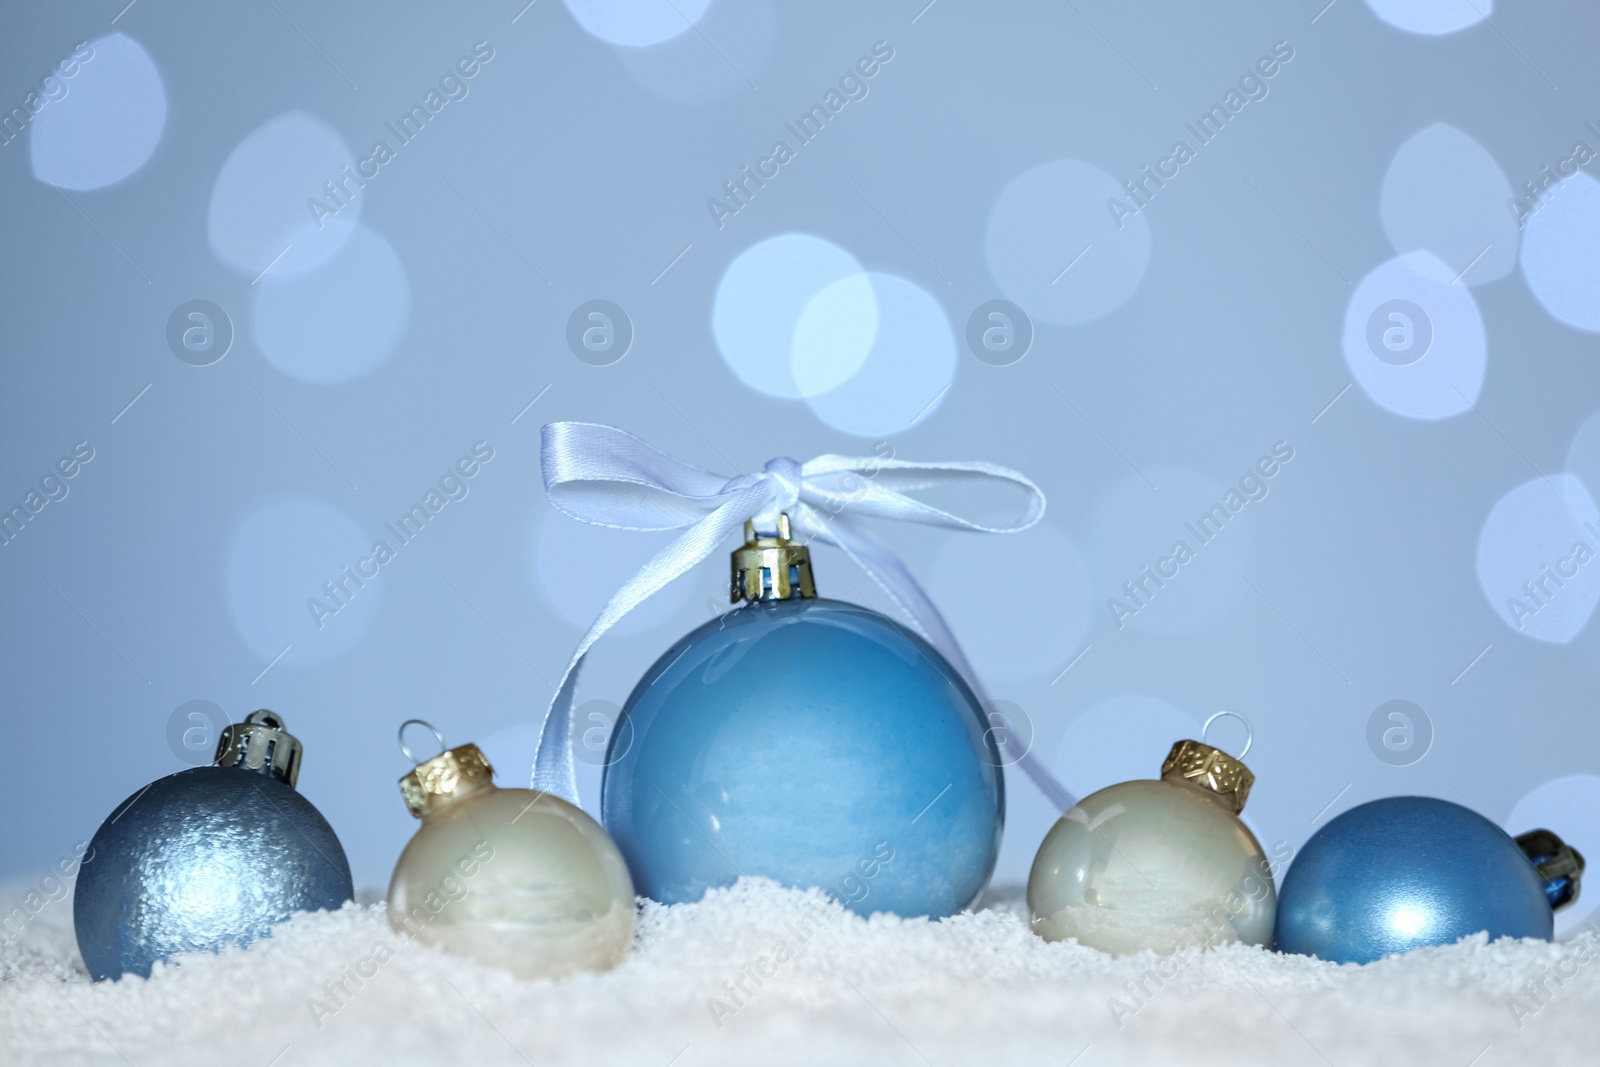 Photo of Beautiful Christmas balls on snow against blurred festive lights